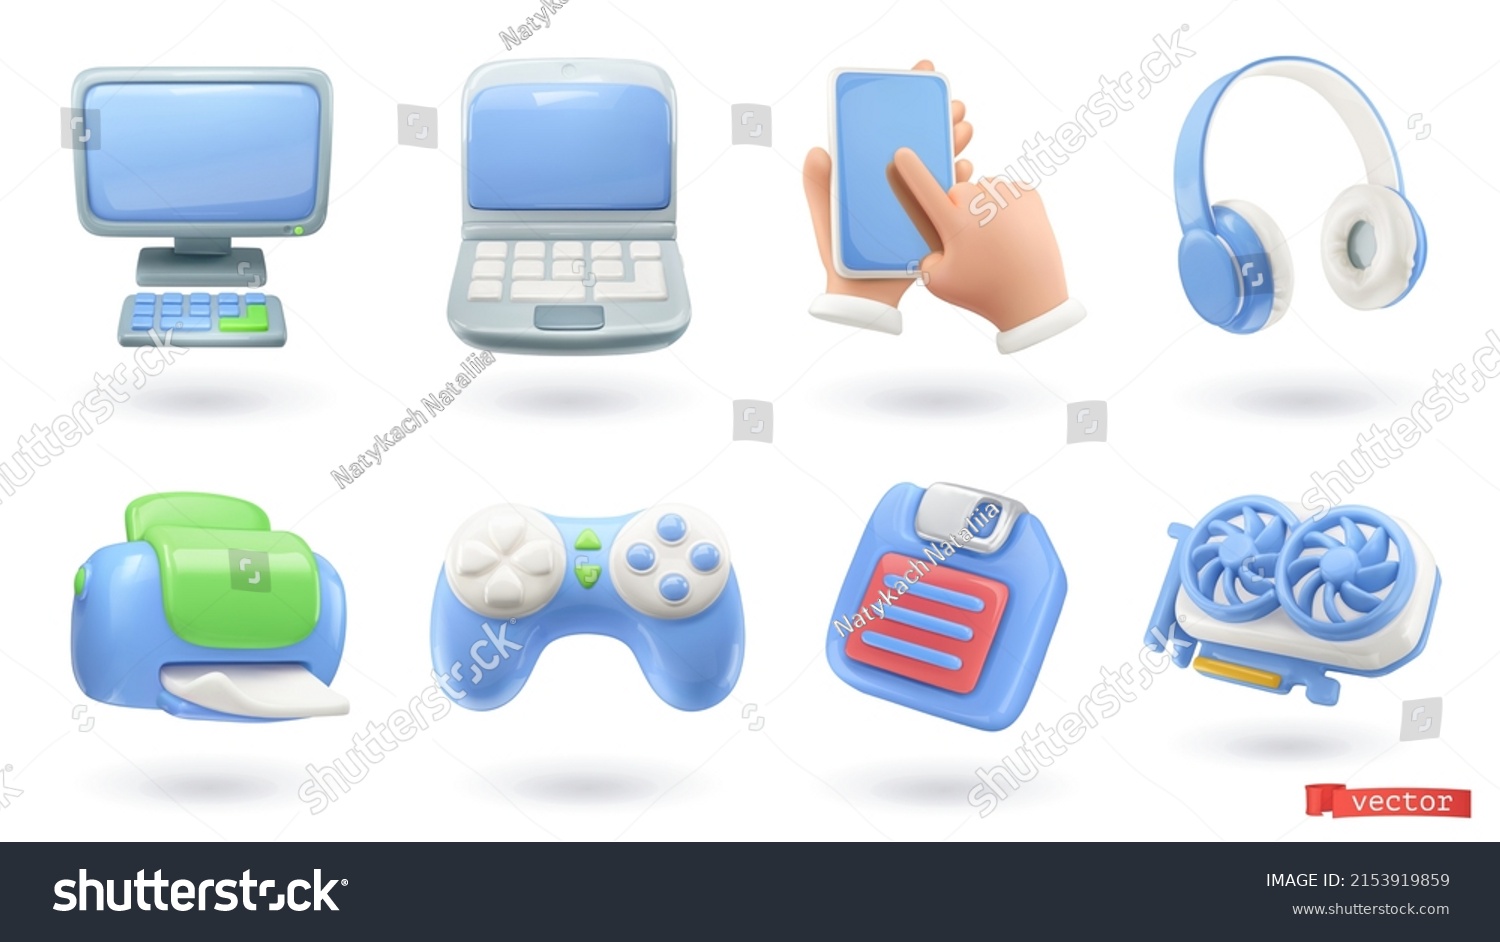 Computer devices 3d render vector icon set. Computer, laptop, smartphone, headphones, printer, game console, floppy disk, video card #2153919859